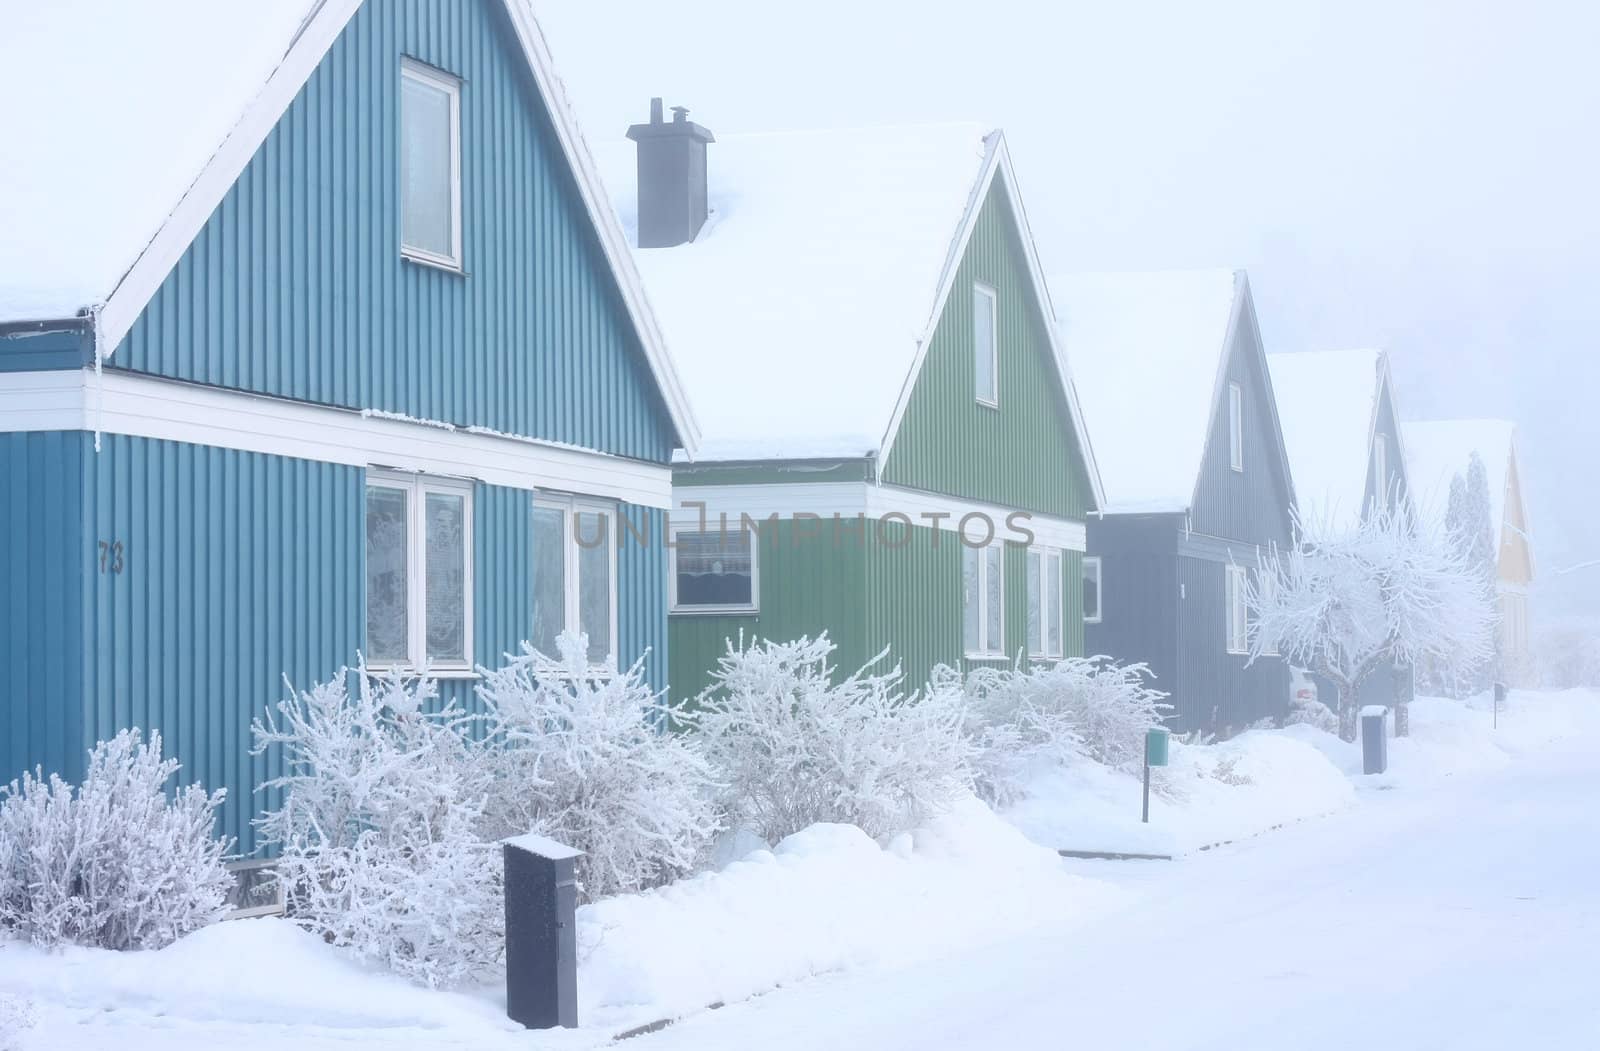 Villas in a extremely cold and frosty winter conditions.